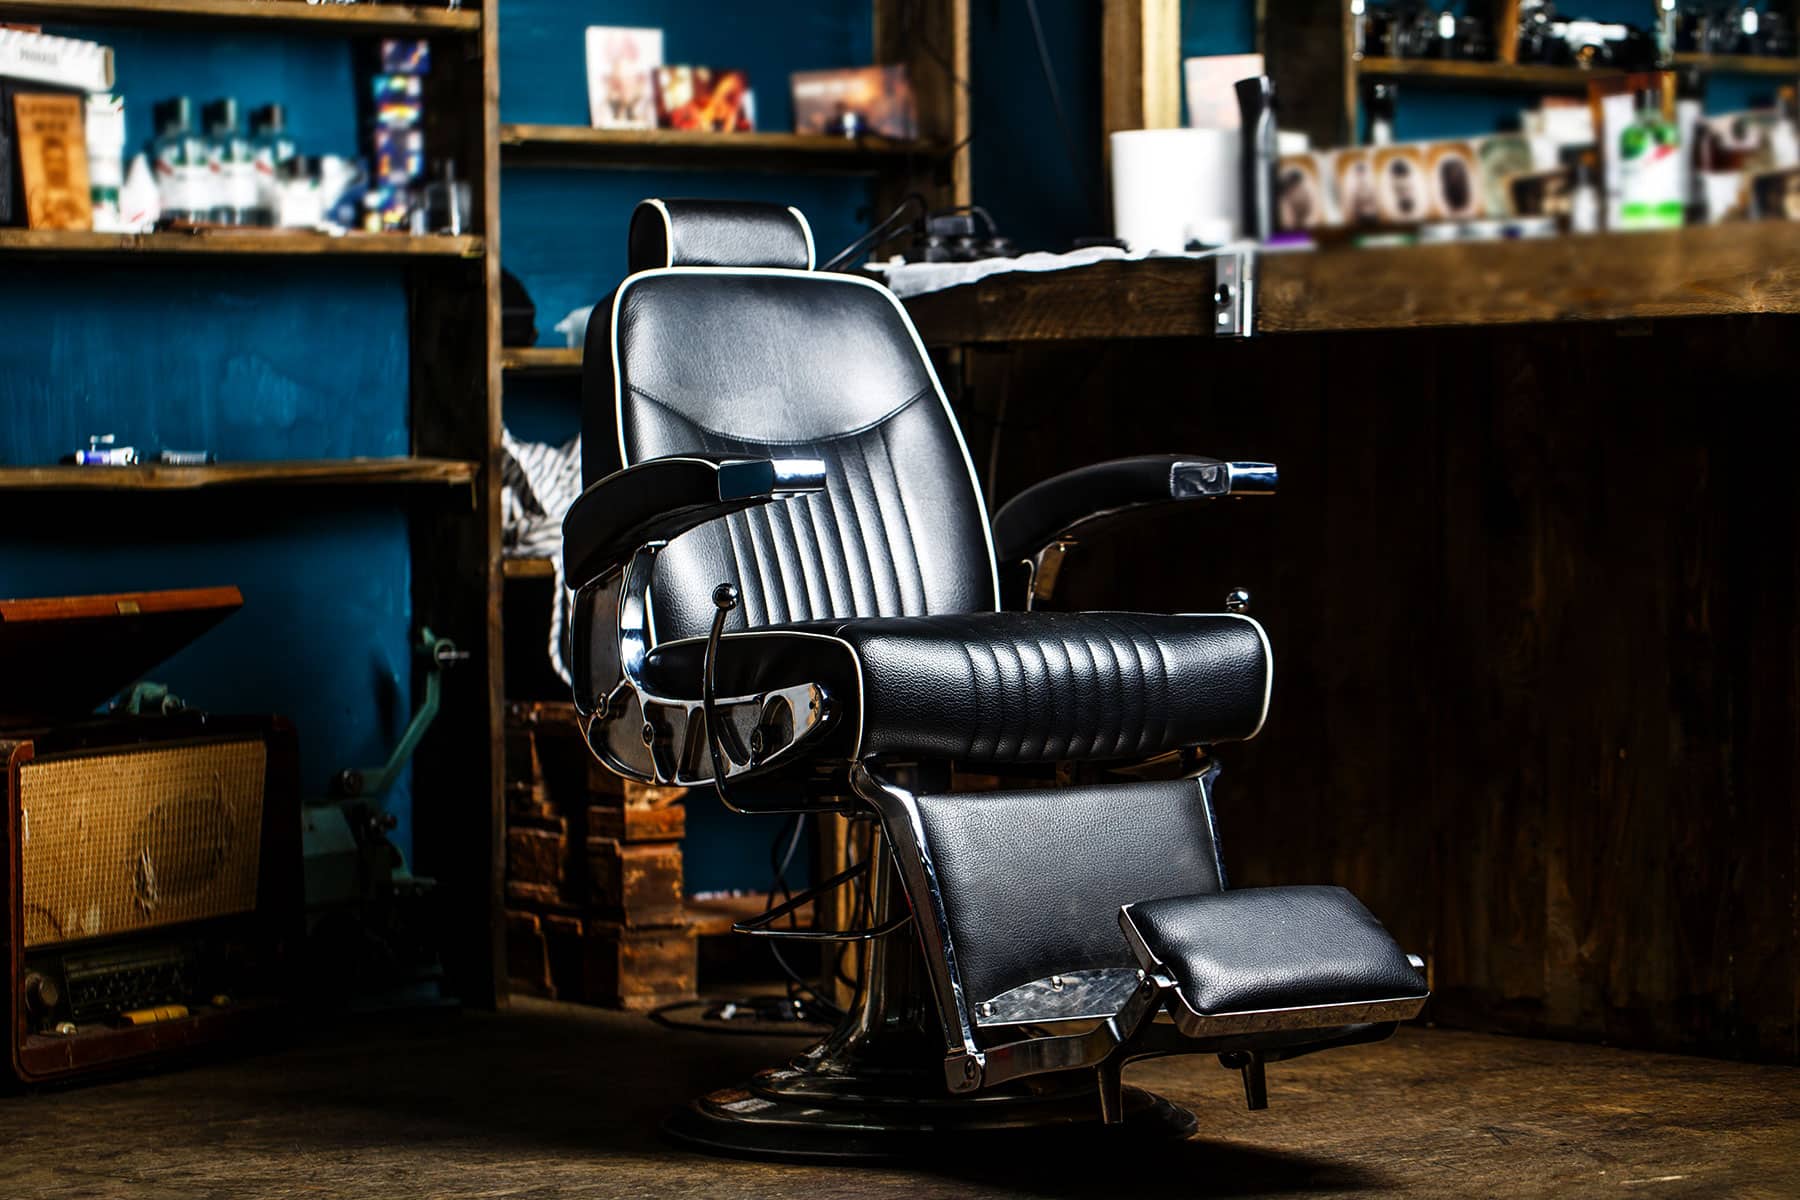 Barber Equipment and Furniture